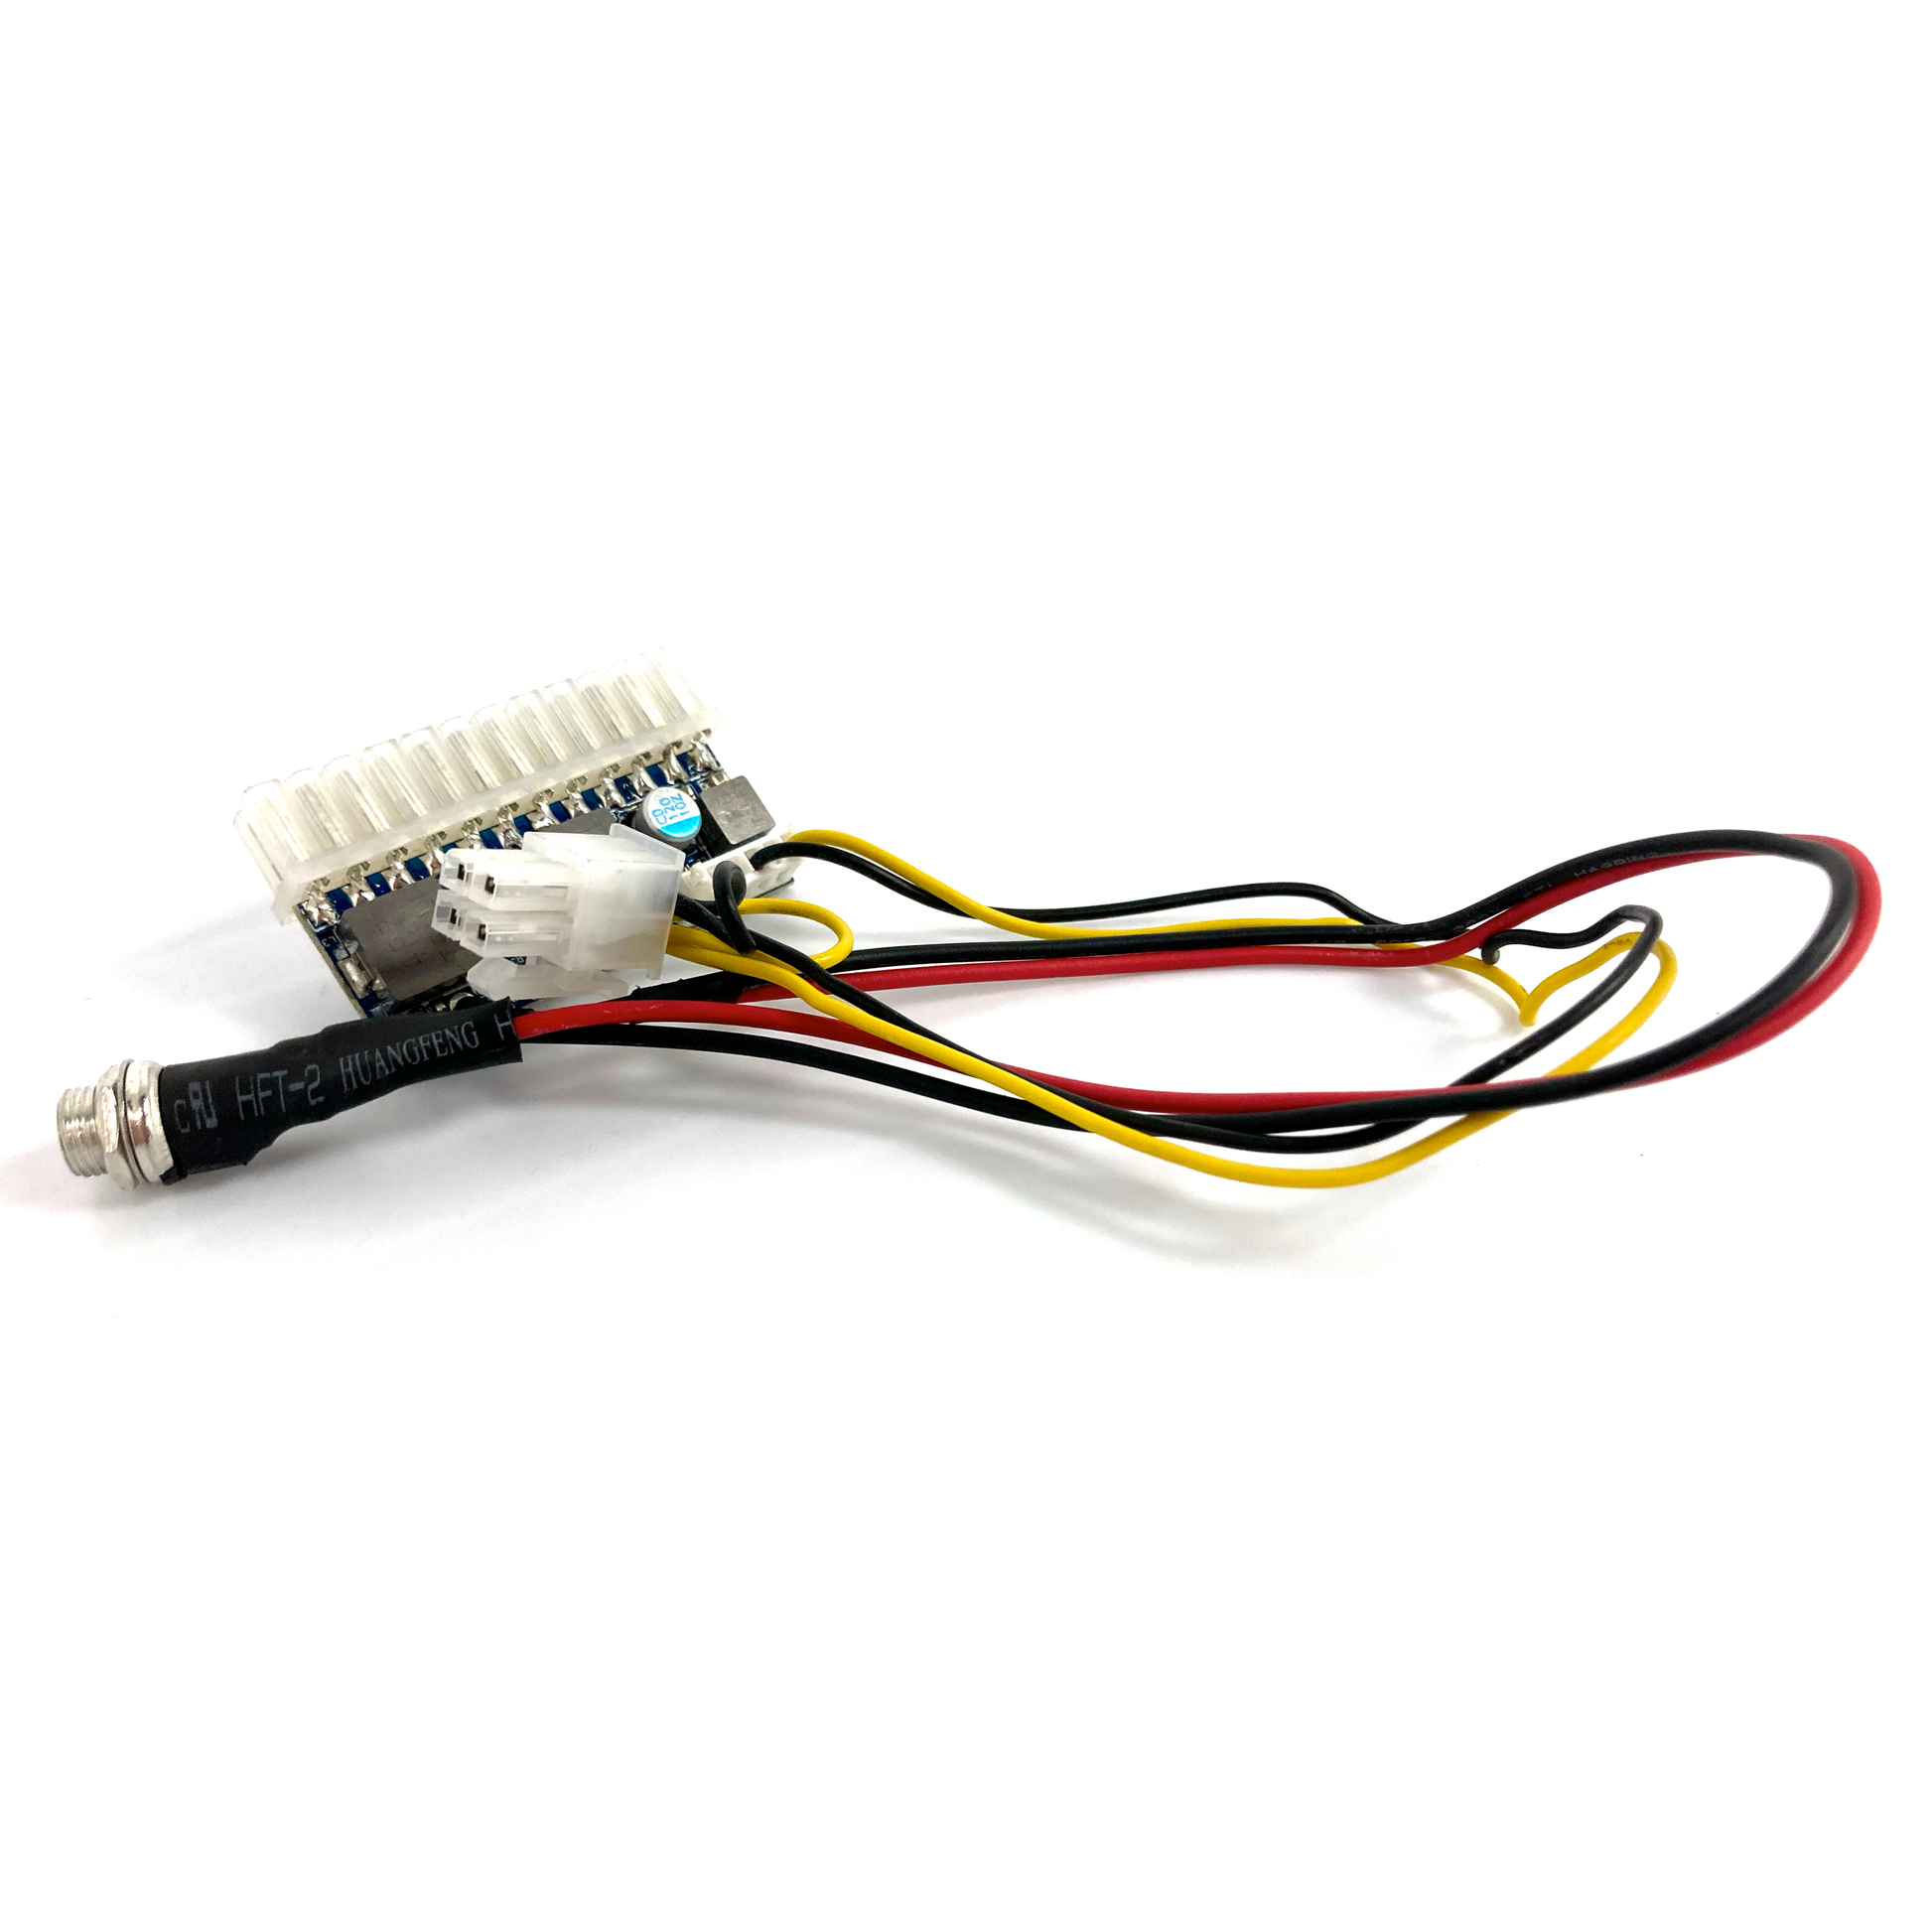 The Pico Board is an adapter that allows you to use a normal 24-pin Motherboard with power from a 12v Power Brick. The Pico Board has been used on all motherboards until the 2021 64-bit Motherboards. Sold by Miele Manufacturing.